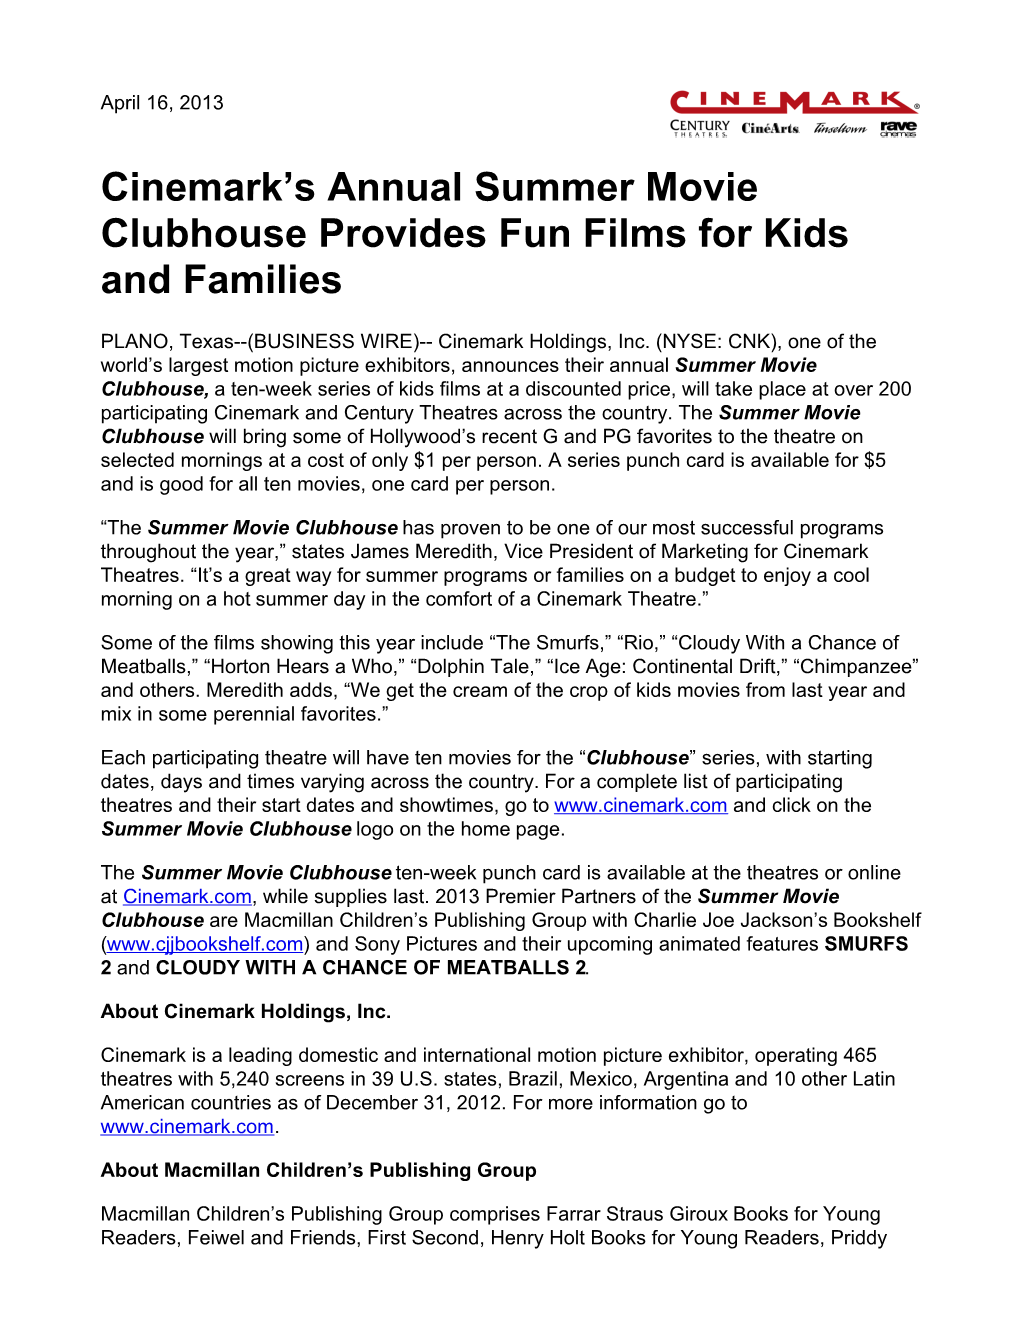 Cinemark's Annual Summer Movie Clubhouse Provides Fun Films For